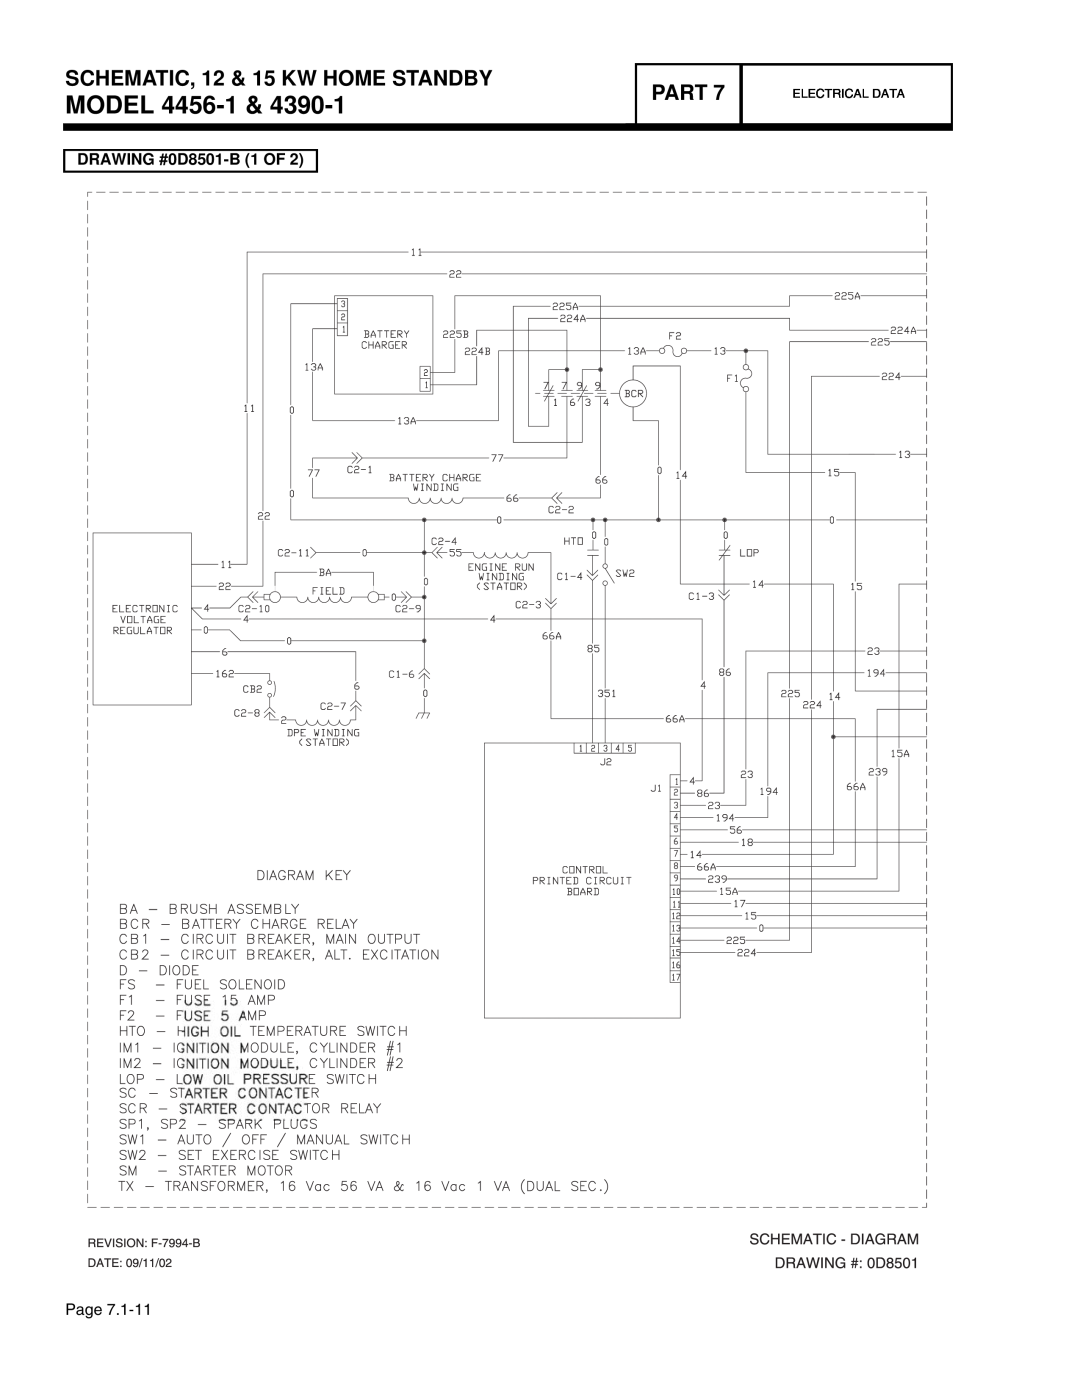 Guardian Technologies 4760 MODEL 4456-1, SCHEMATIC, 12 & 15 KW HOME STANDBY, Part, DRAWING #0D8501-B 1 OF, Electrical Data 